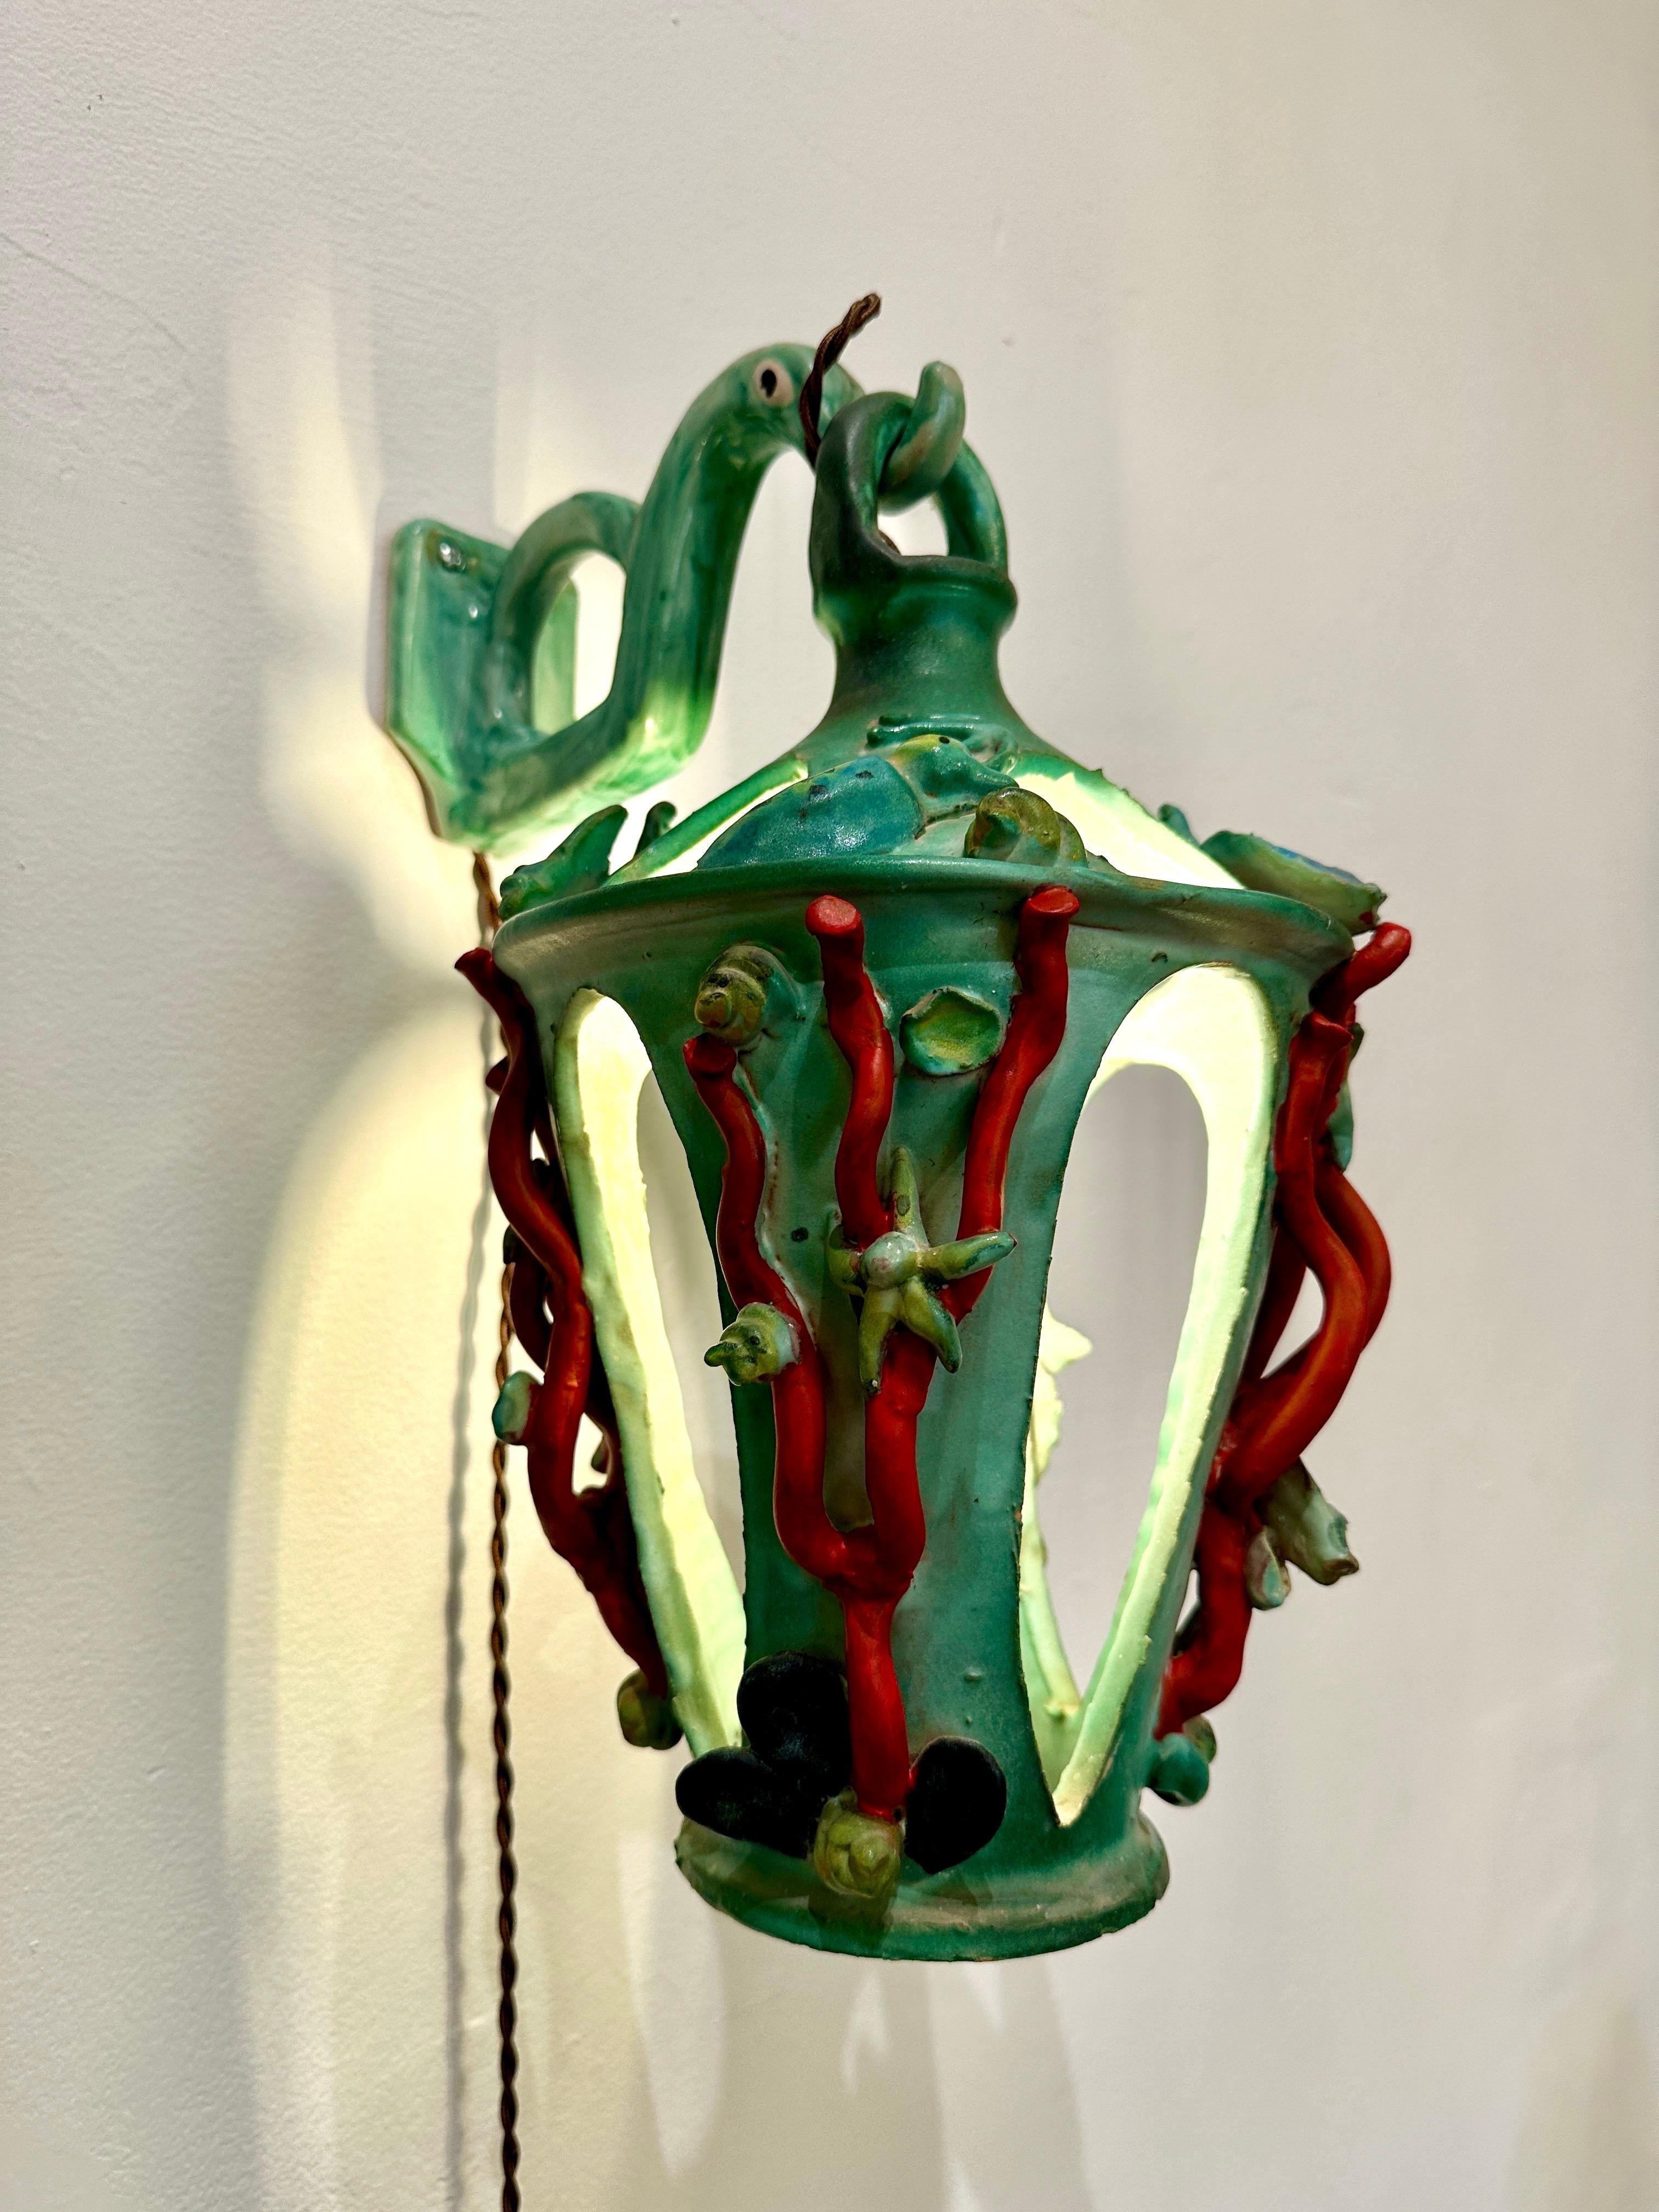 This truly magical Italian sea life maiolica wall mounted lantern depicts relief of sea creatures and vivid red corals and seaweed.  One single bulb provides ample illumination - this can be used as shown, wall mounted OR if you prefer to hang it as